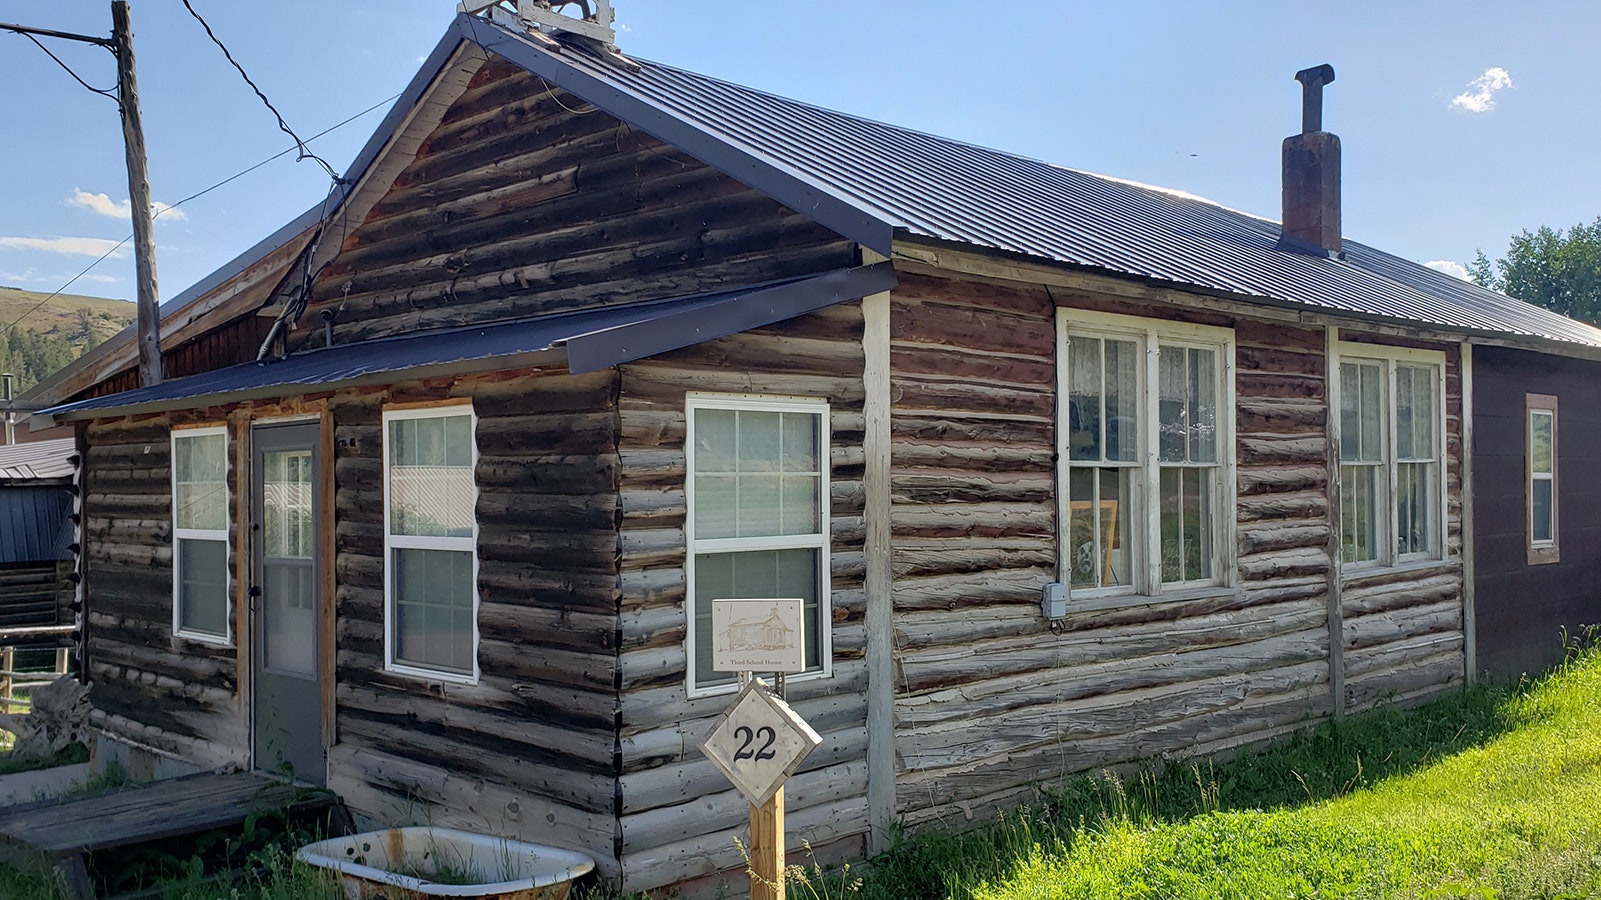 After Atlantic Citys second school house slid down a hill, it was dismantled and placed at its present location. School continued until the 1950s when the town's population plummeted.